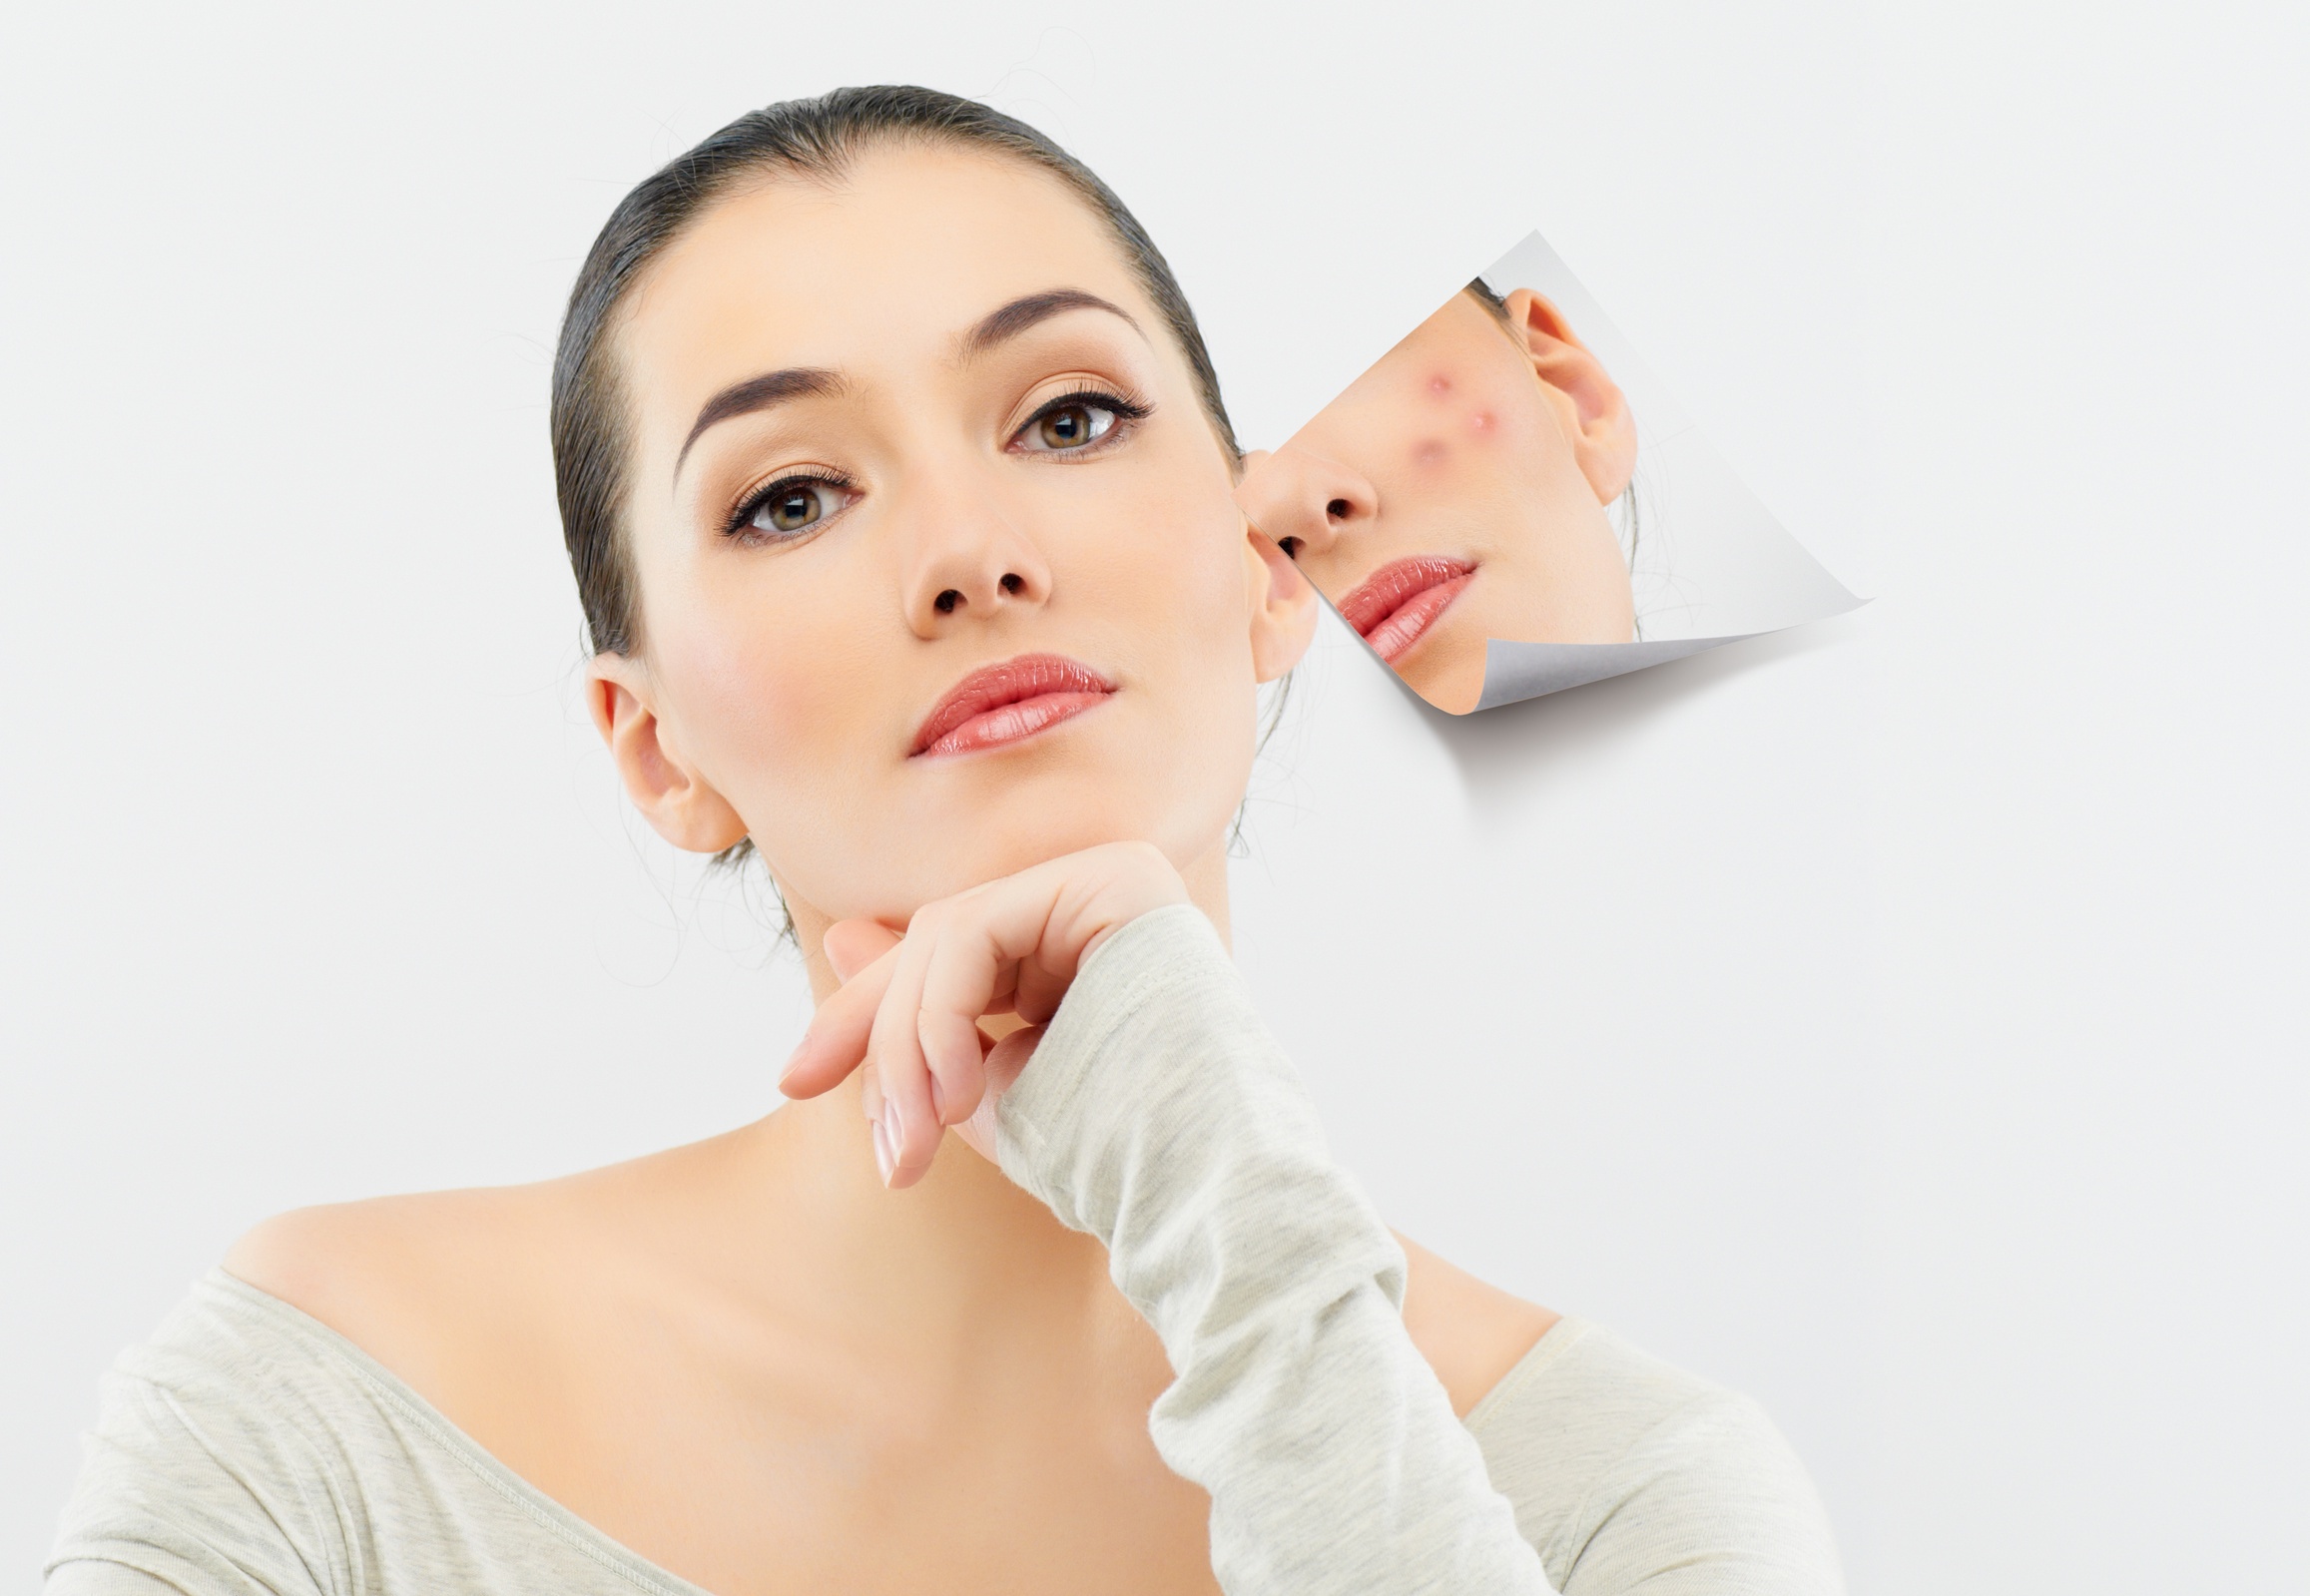 What Do You Need To Know Before Starting Acne Treatment